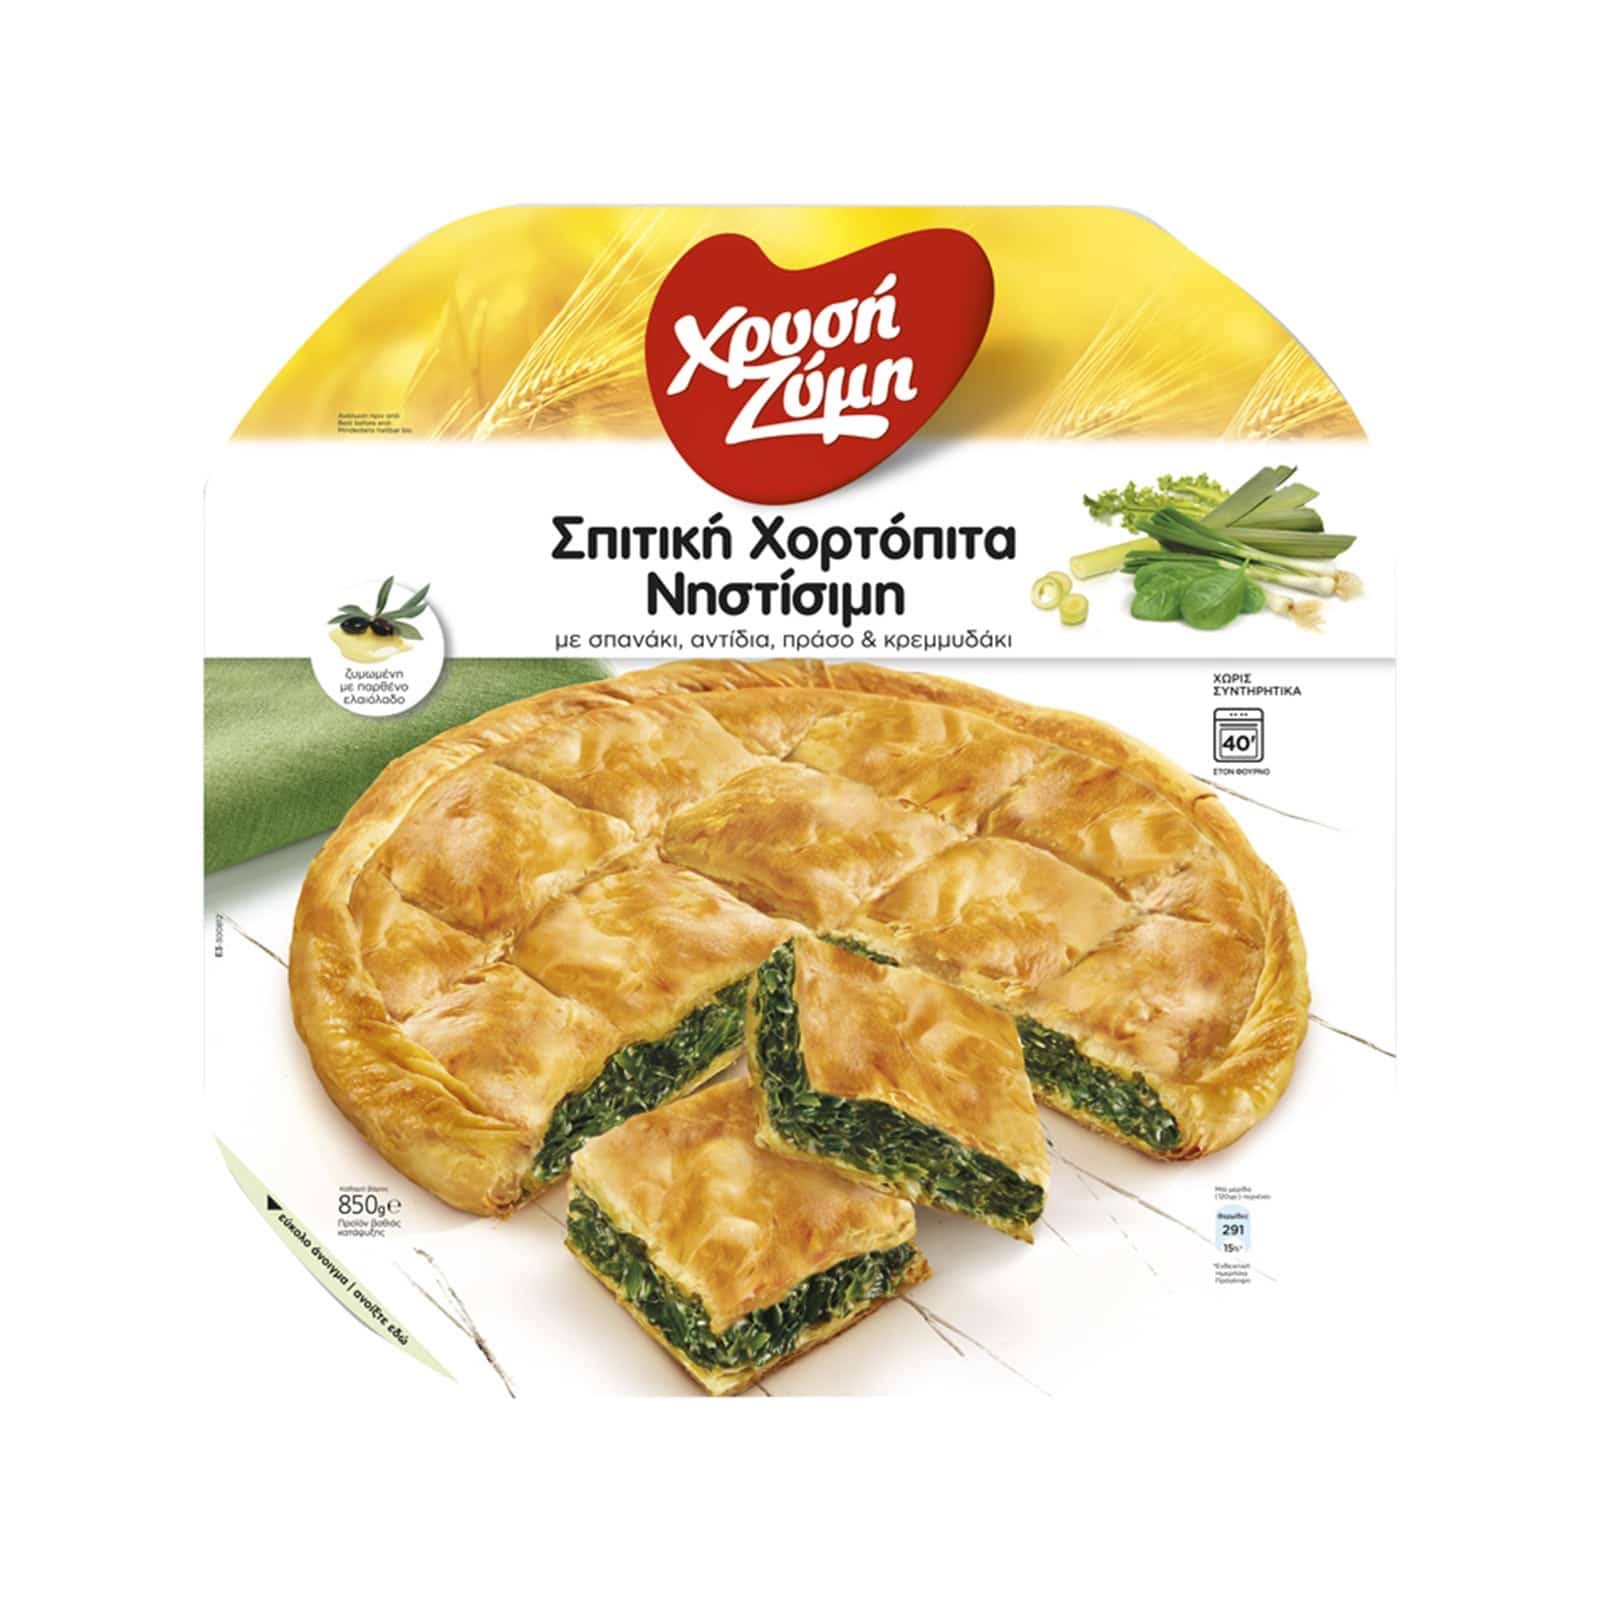 Chrysi Zimi Golden Dough Home Vegetable with Spinach Knives Pies - 850 Grams - Greek Food Emporium - Delivered by Mercato